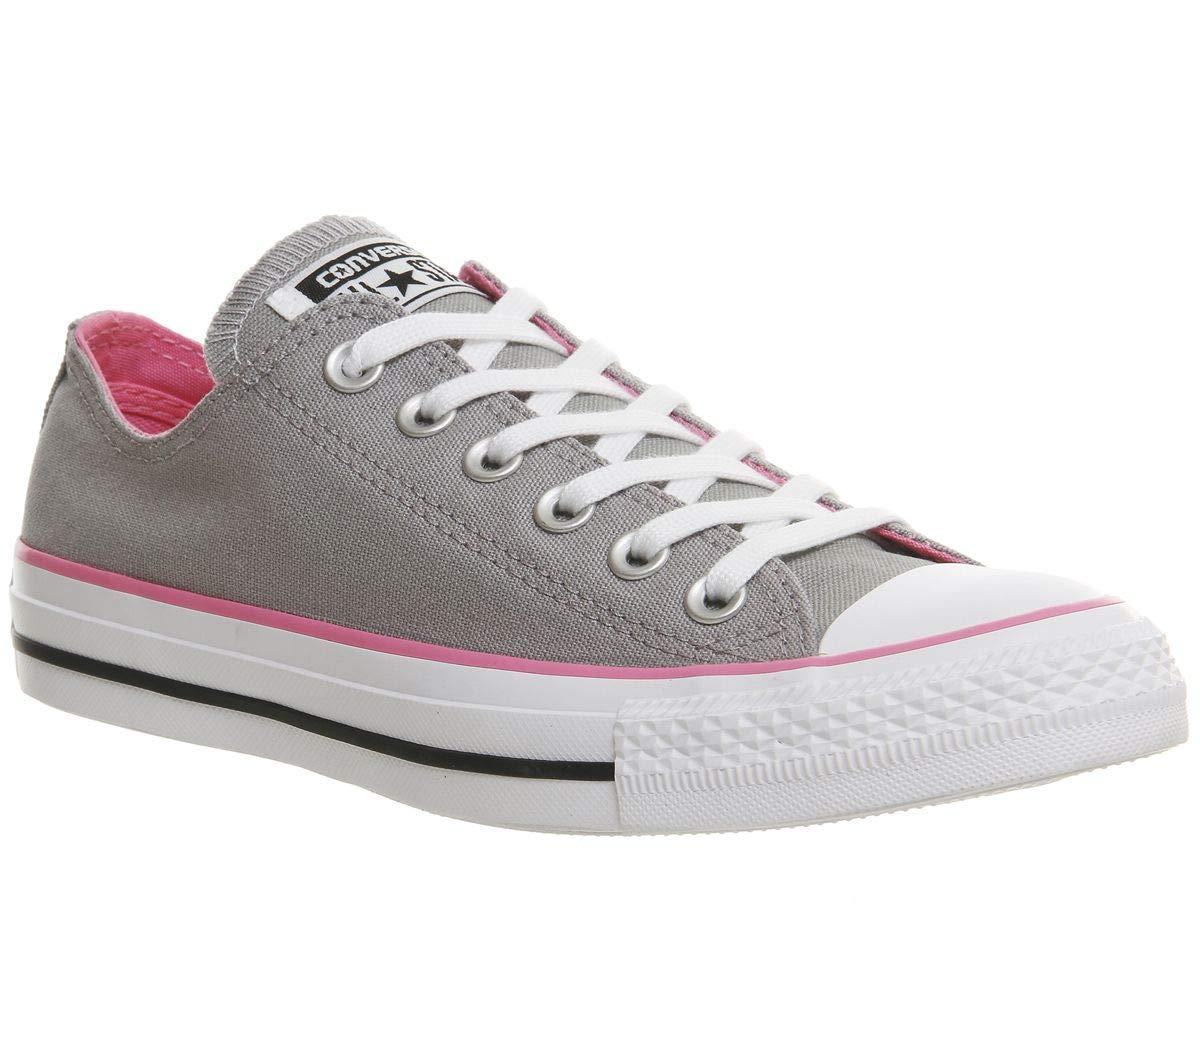 converse all star low grey